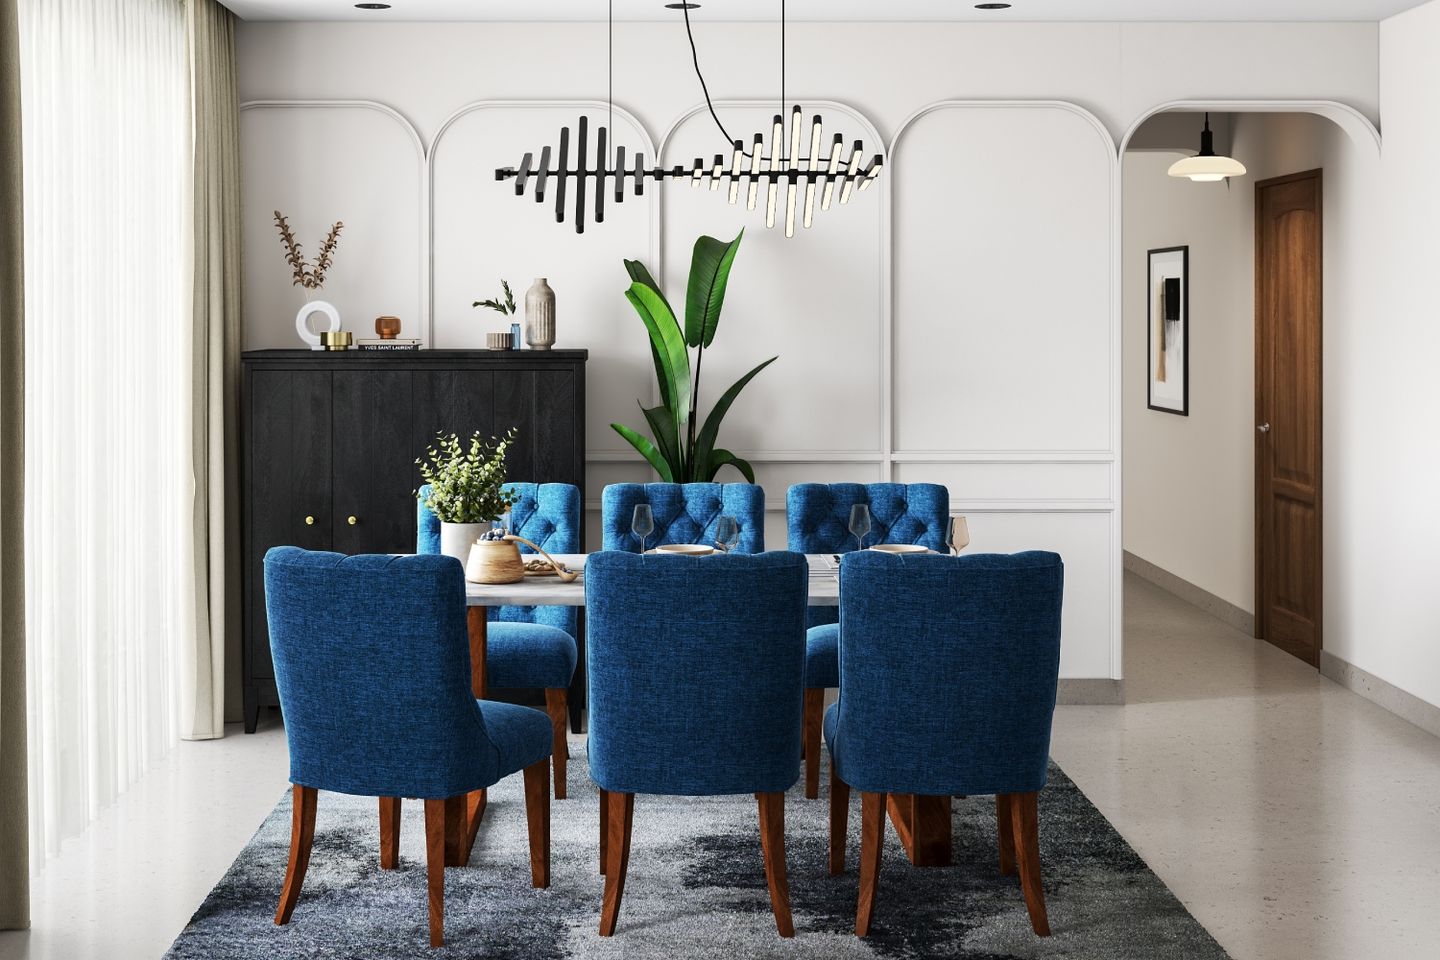 15x13 Ft  6-Seater Dining Room Design With Blue Upholstered Chairs - Livspace